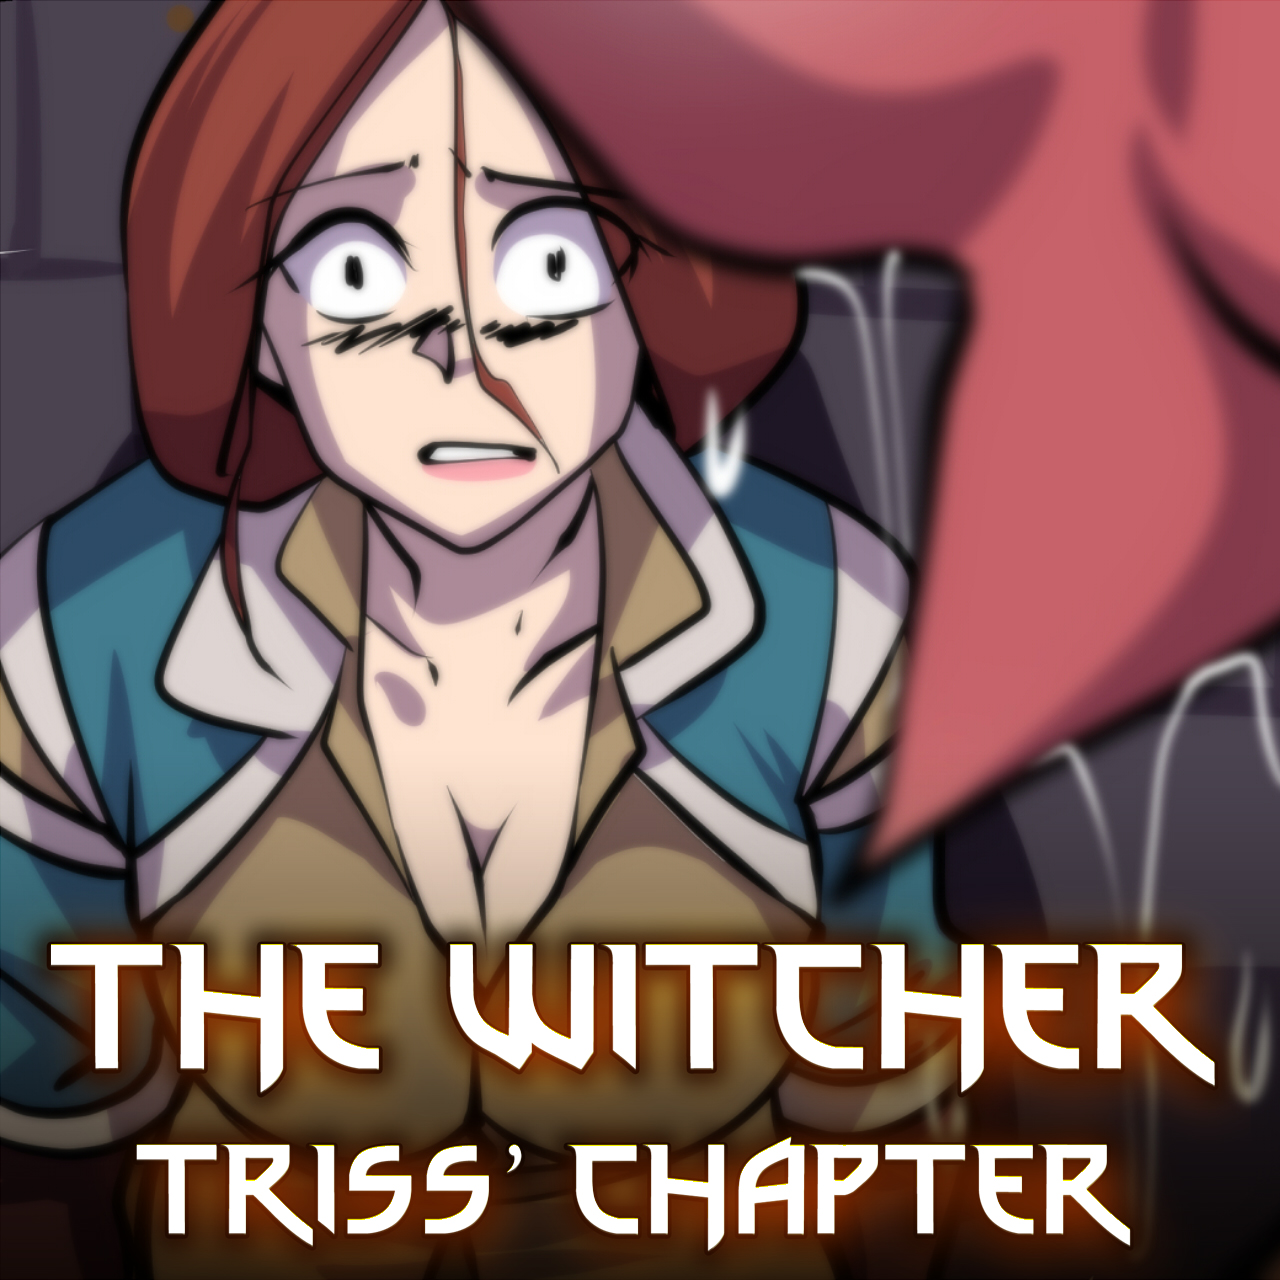 The Witcher: Triss' Chapter